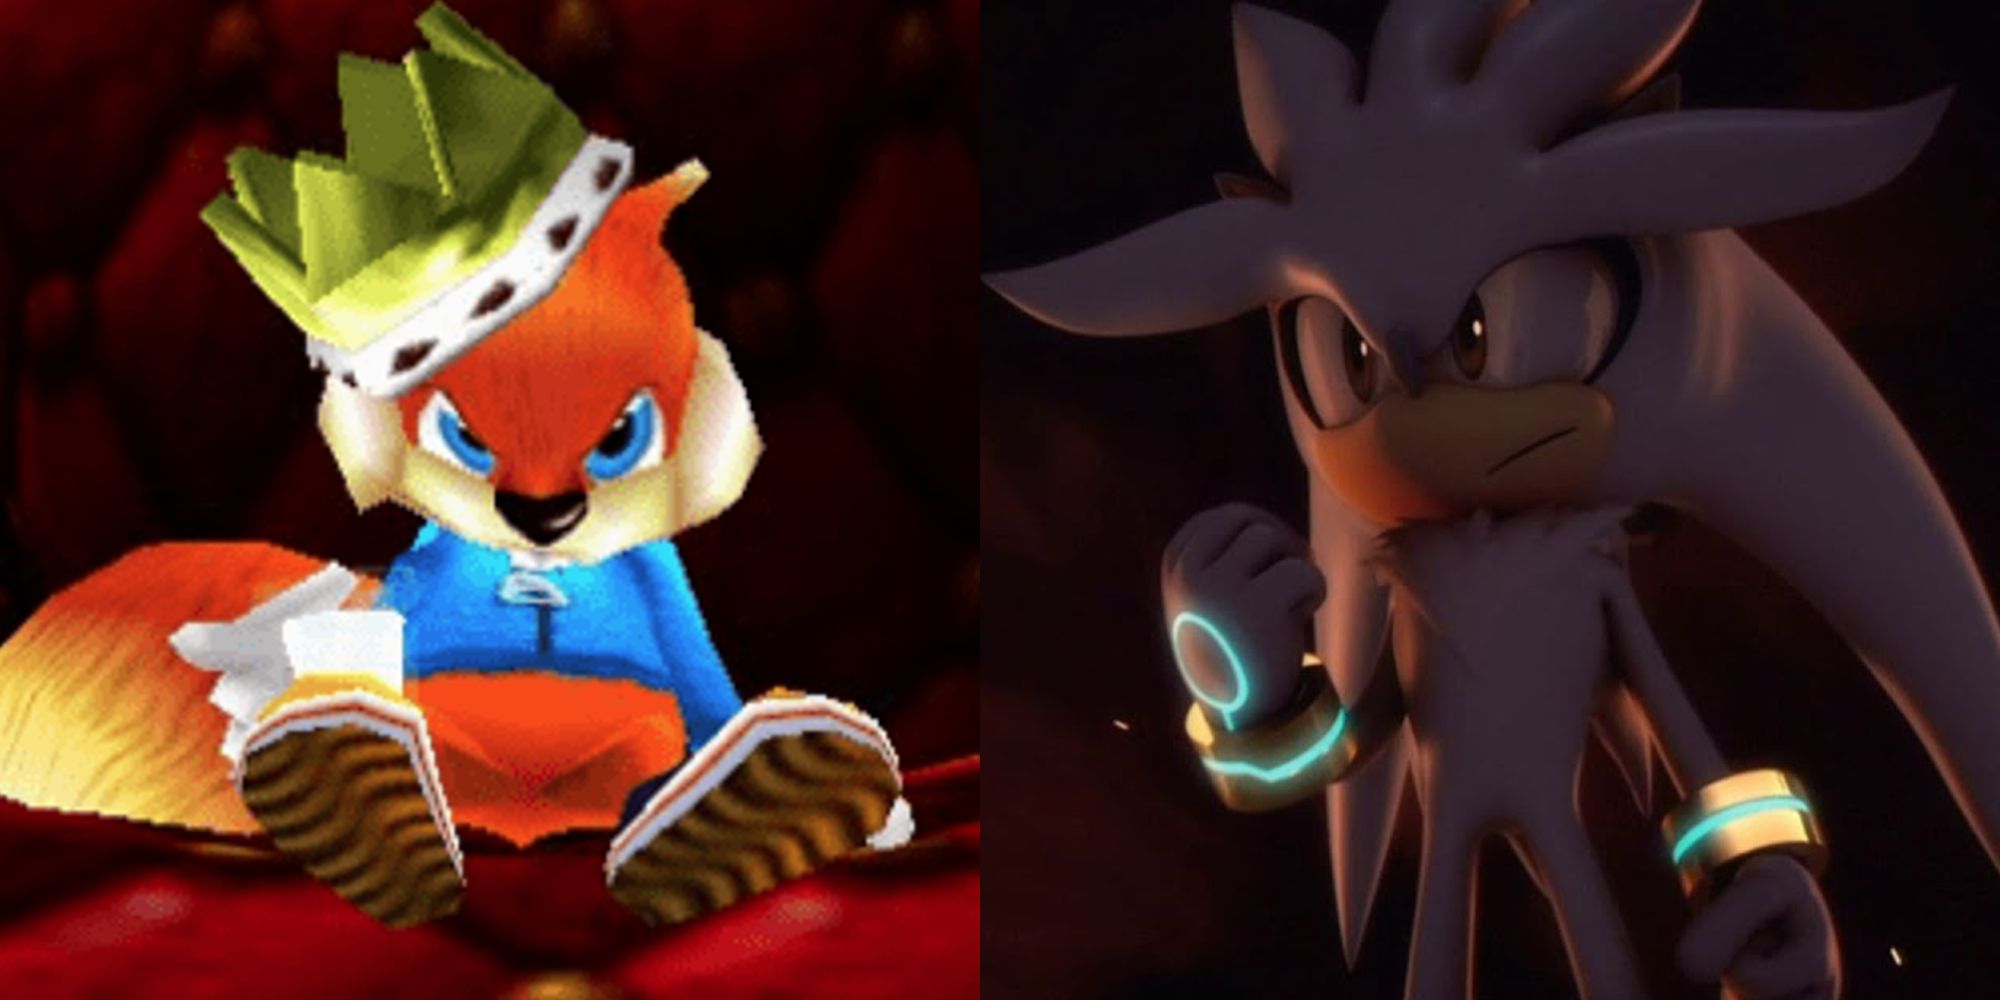 Conker wearing a crown drinking alcohol; Silver the Hedgehog holding his fist